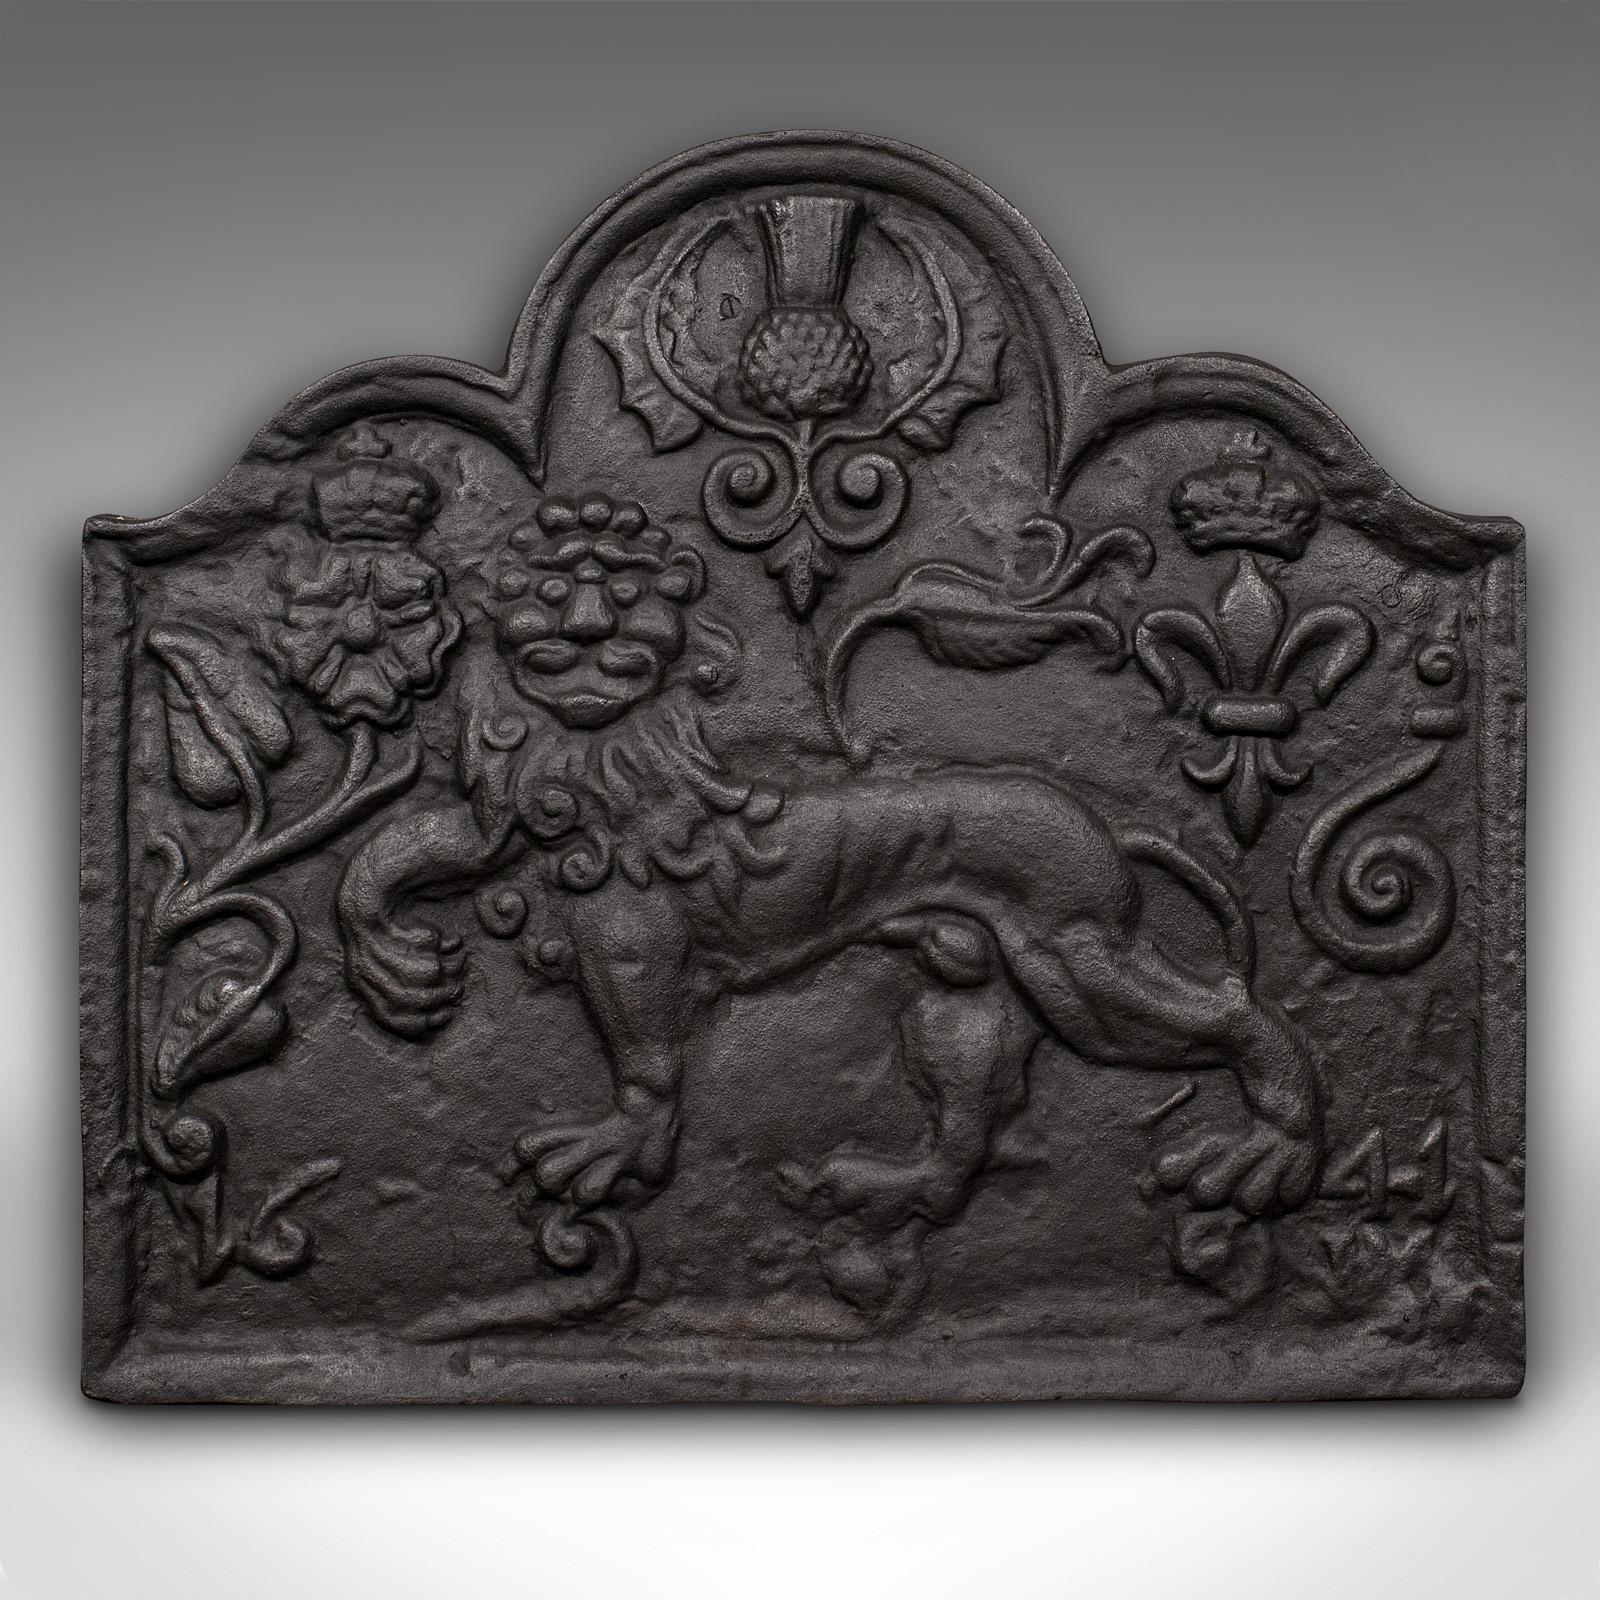 This is an antique relief fire back. An English, cast iron decorative fireplace reflector with Carolean taste, dating to the late Victorian period, circa 1900.

Charmingly ornate cast fire back with superb lion motif.
Displays a desirable aged